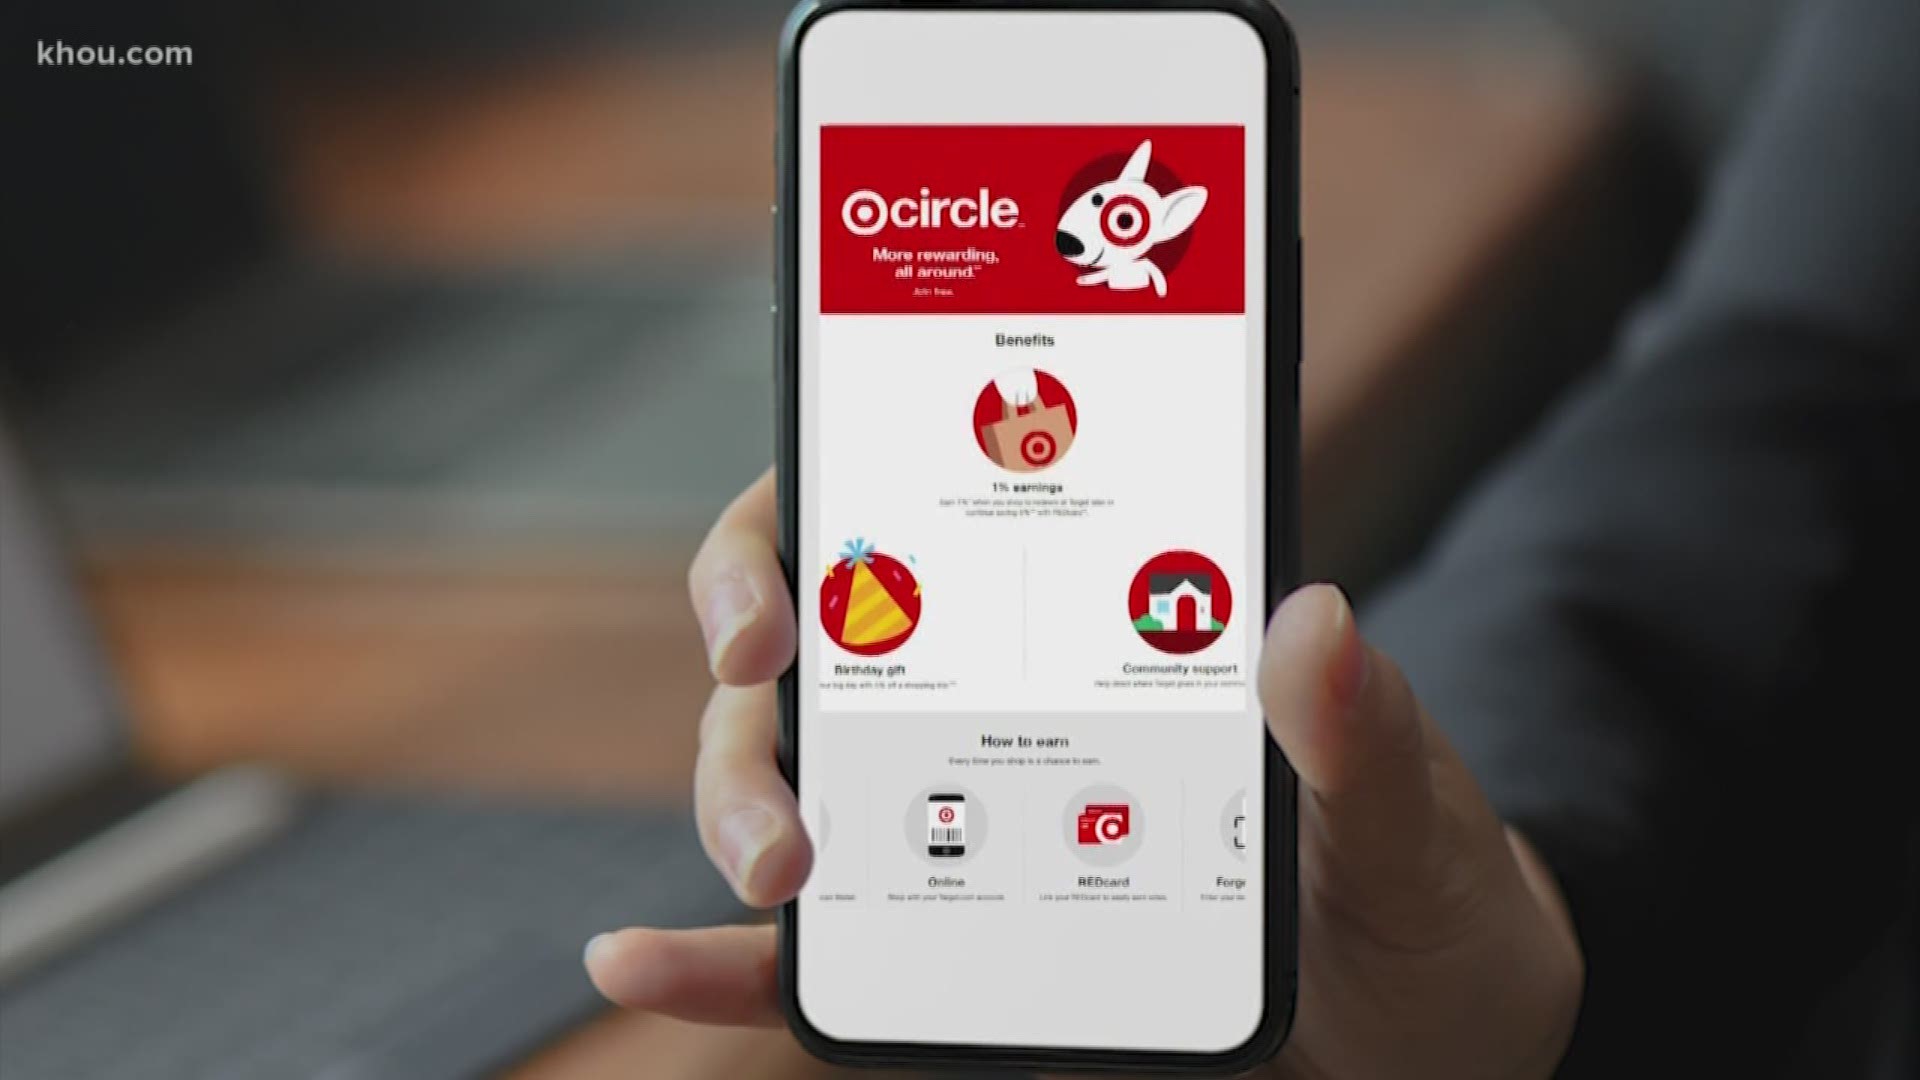 how to apply target circle offers in app